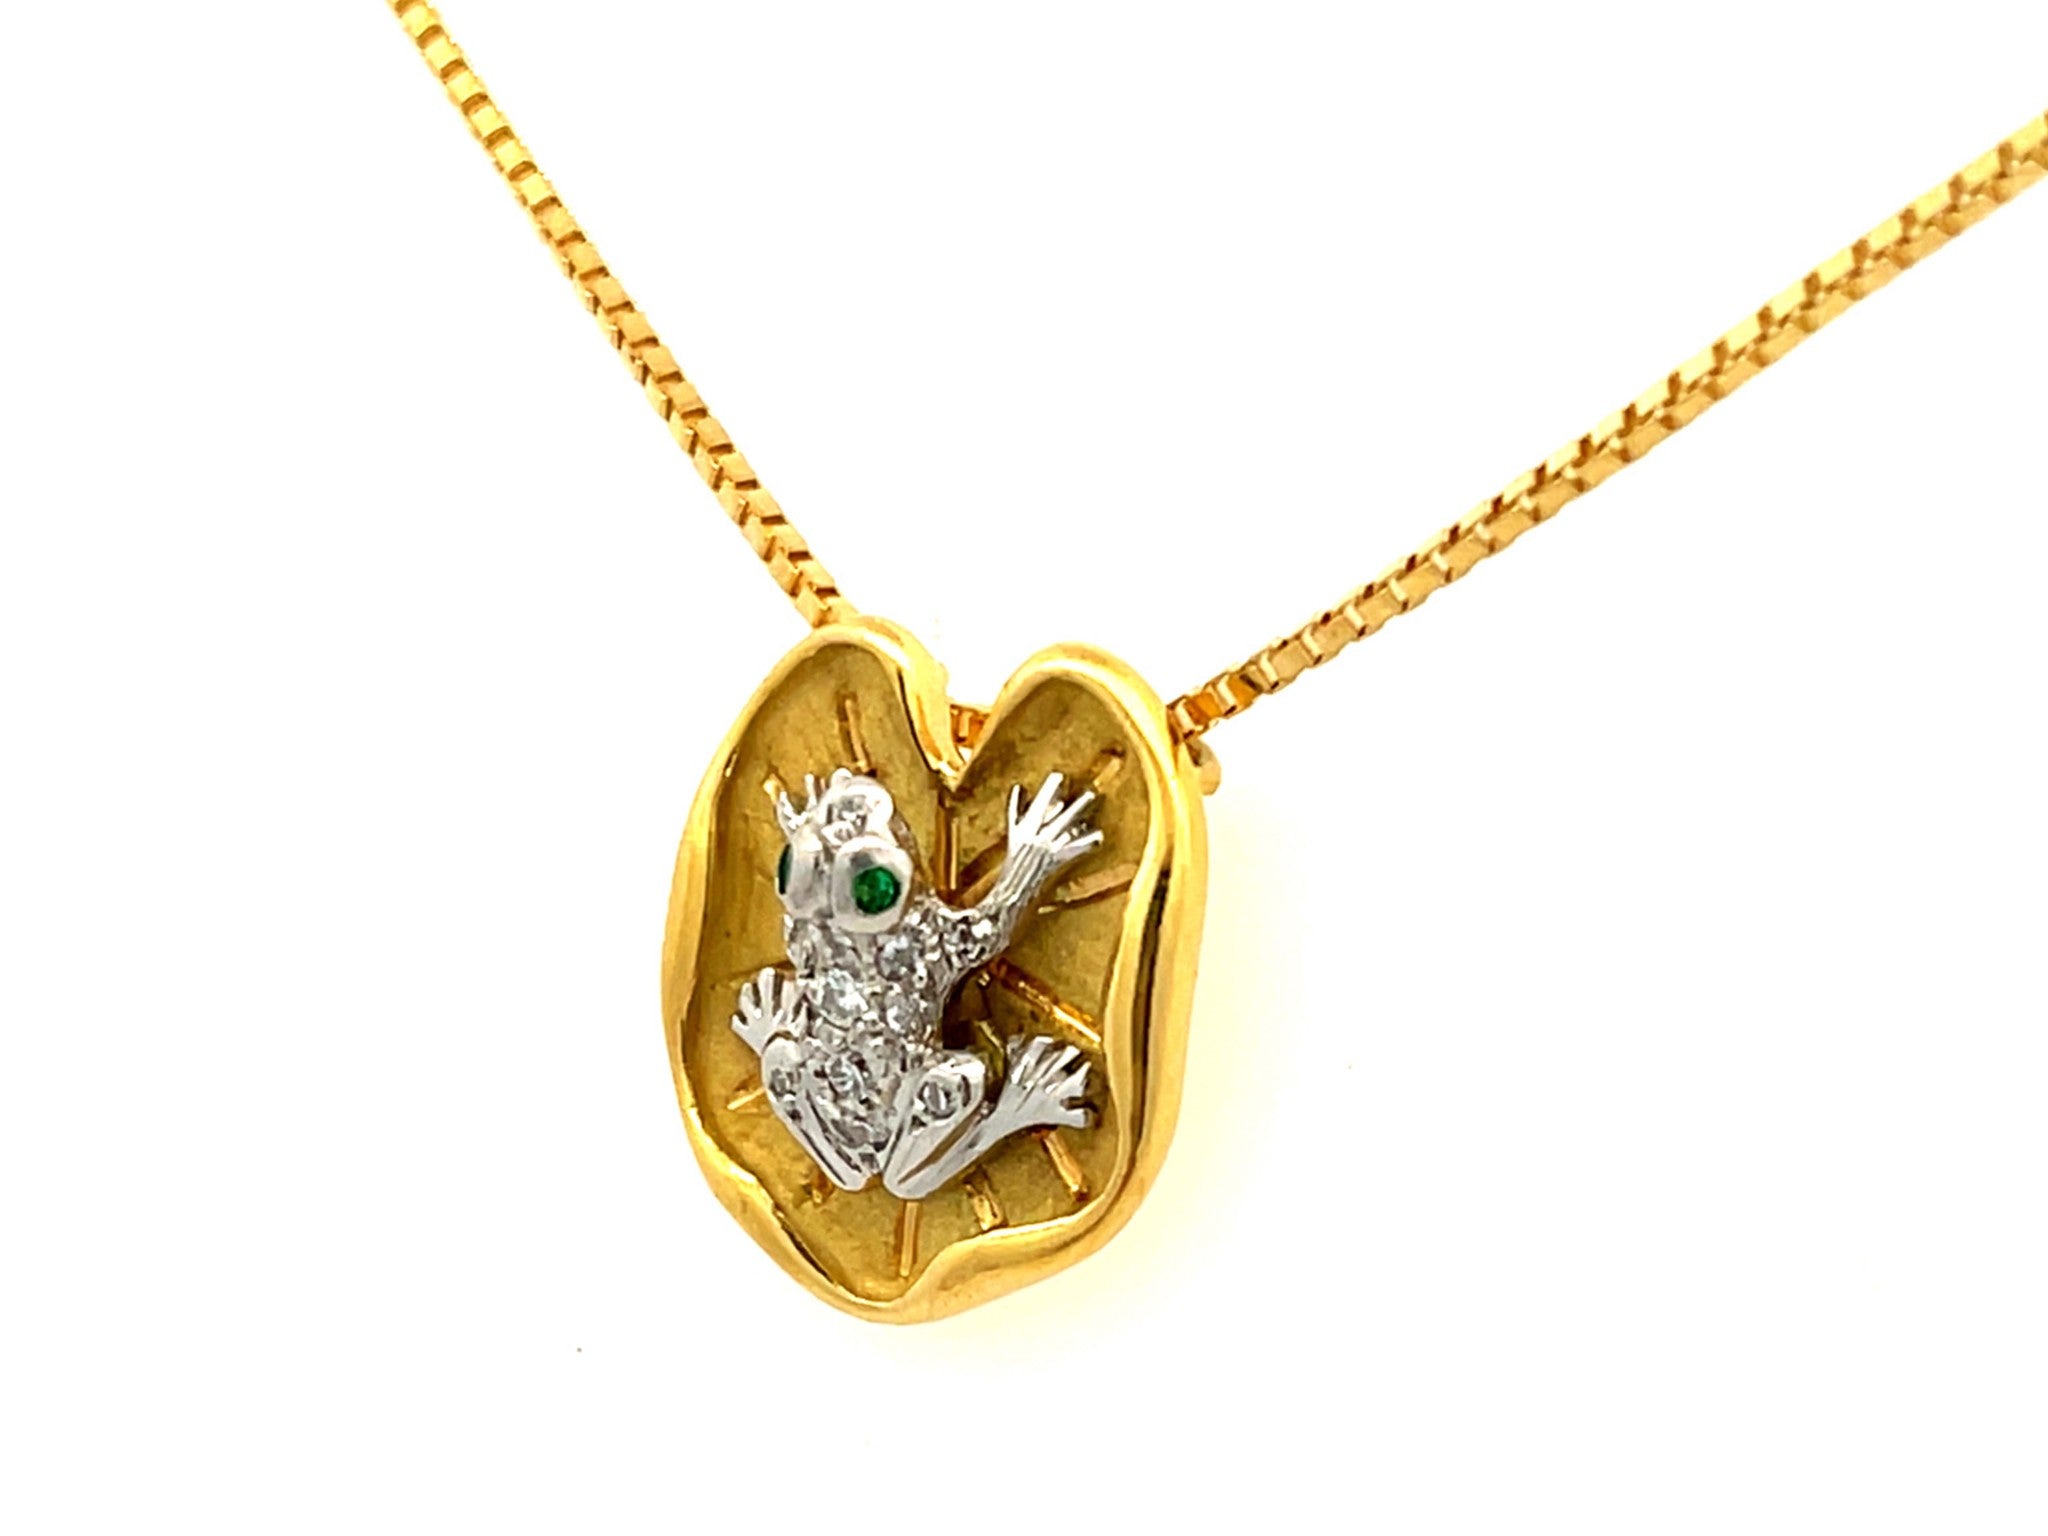 Emerald Eyes & Diamond Frog Necklace on Lily Pad in 18K Yellow Gold and Platinum